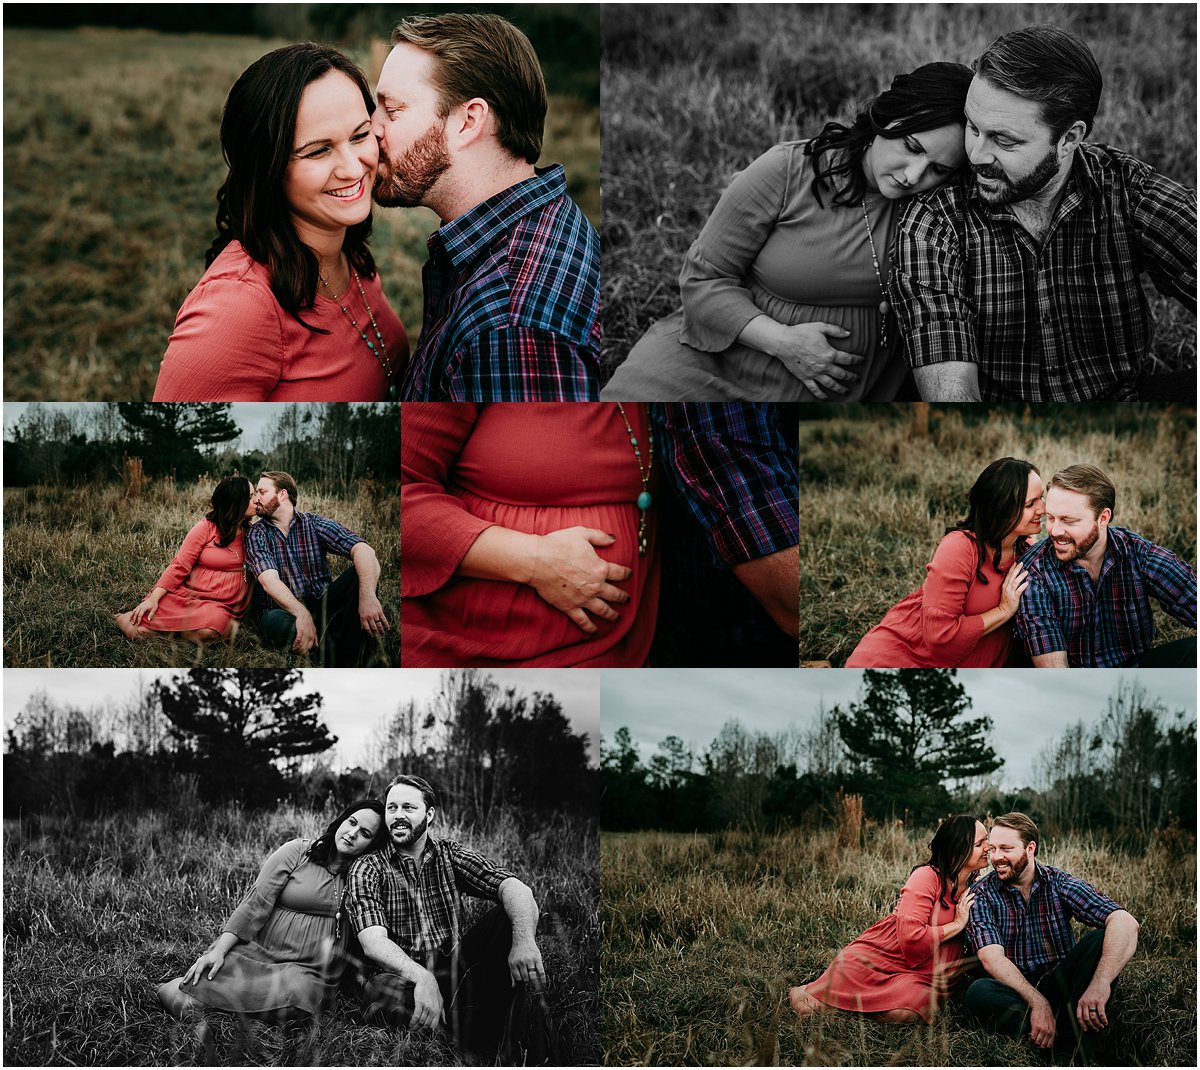 Couples photography session - pregnant mother with hands on her belly | Orlando Newborn and Maternity Photographer